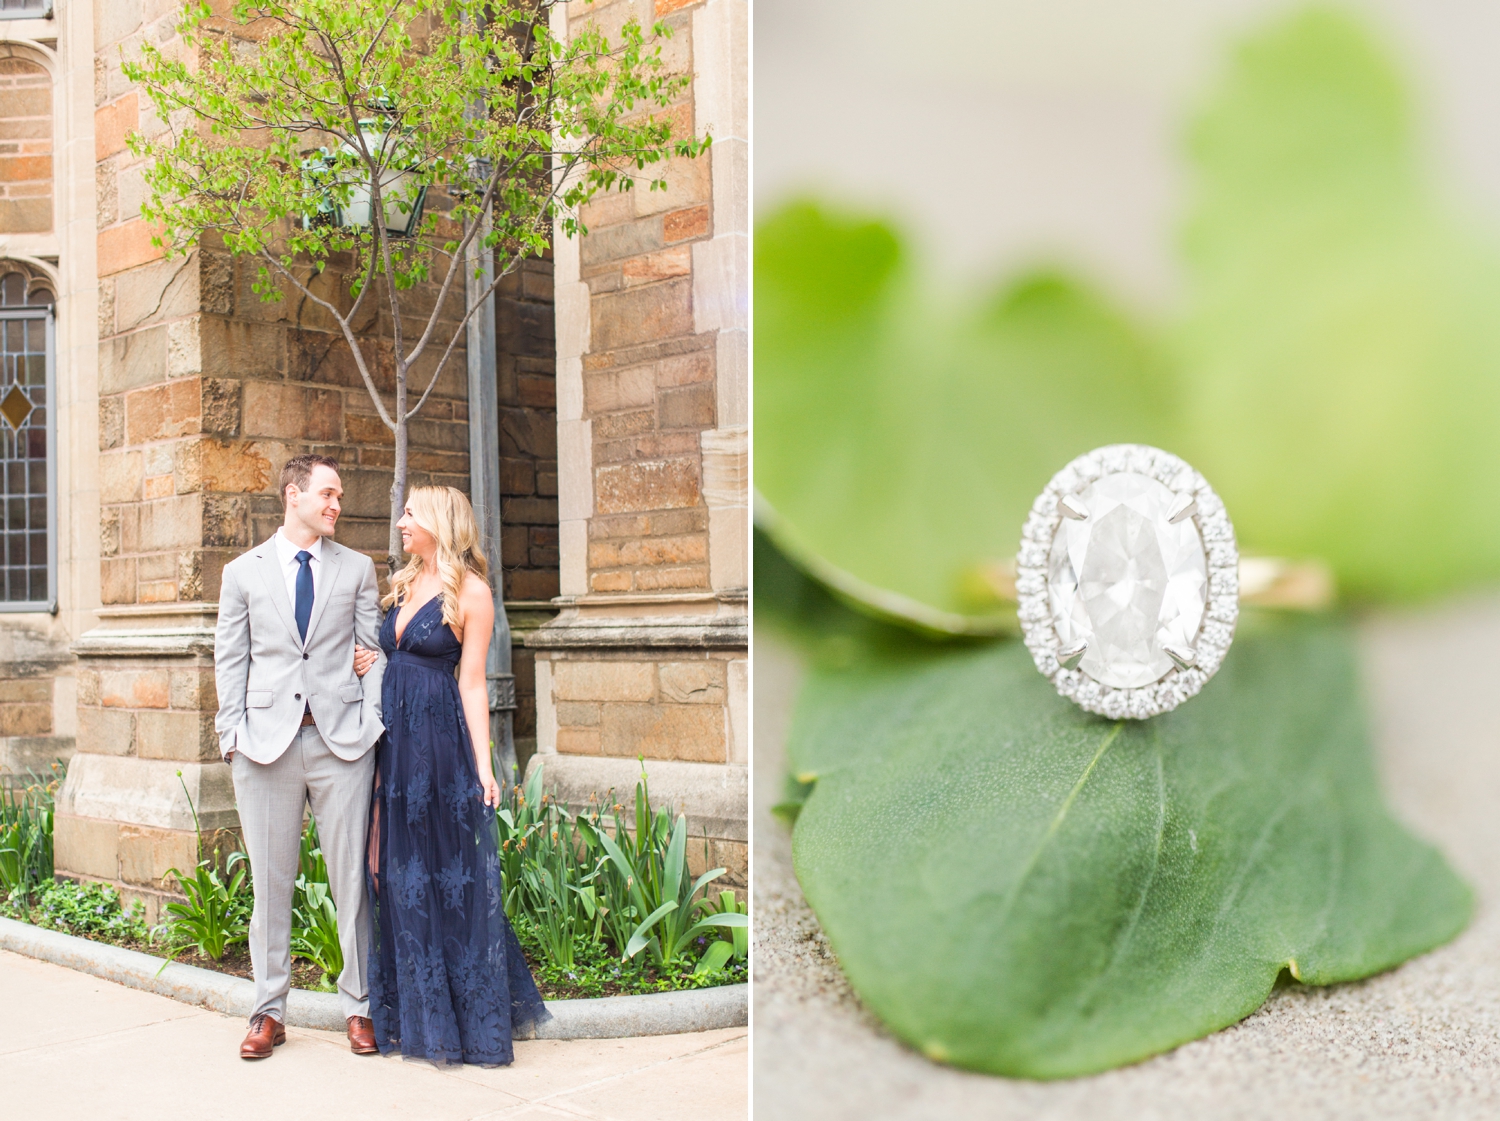 sterling-library-yale-university-engagement-session-new-haven-connecticut-wedding-photographer-andrea-chris-shaina-lee-photography-photo